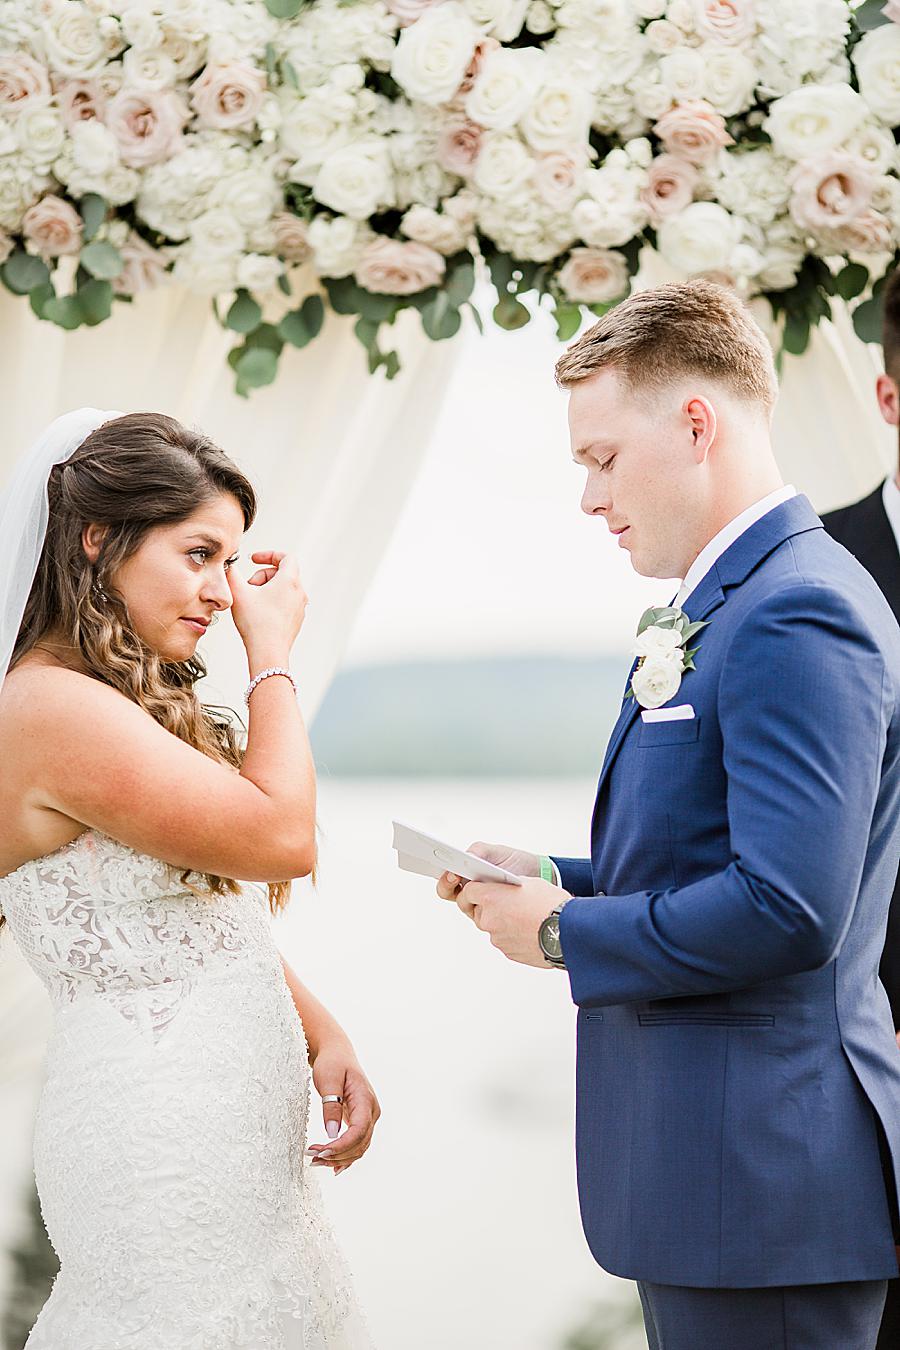 Personalized vows at this WindRiver Wedding Day by Knoxville Wedding Photographer, Amanda May Photos.